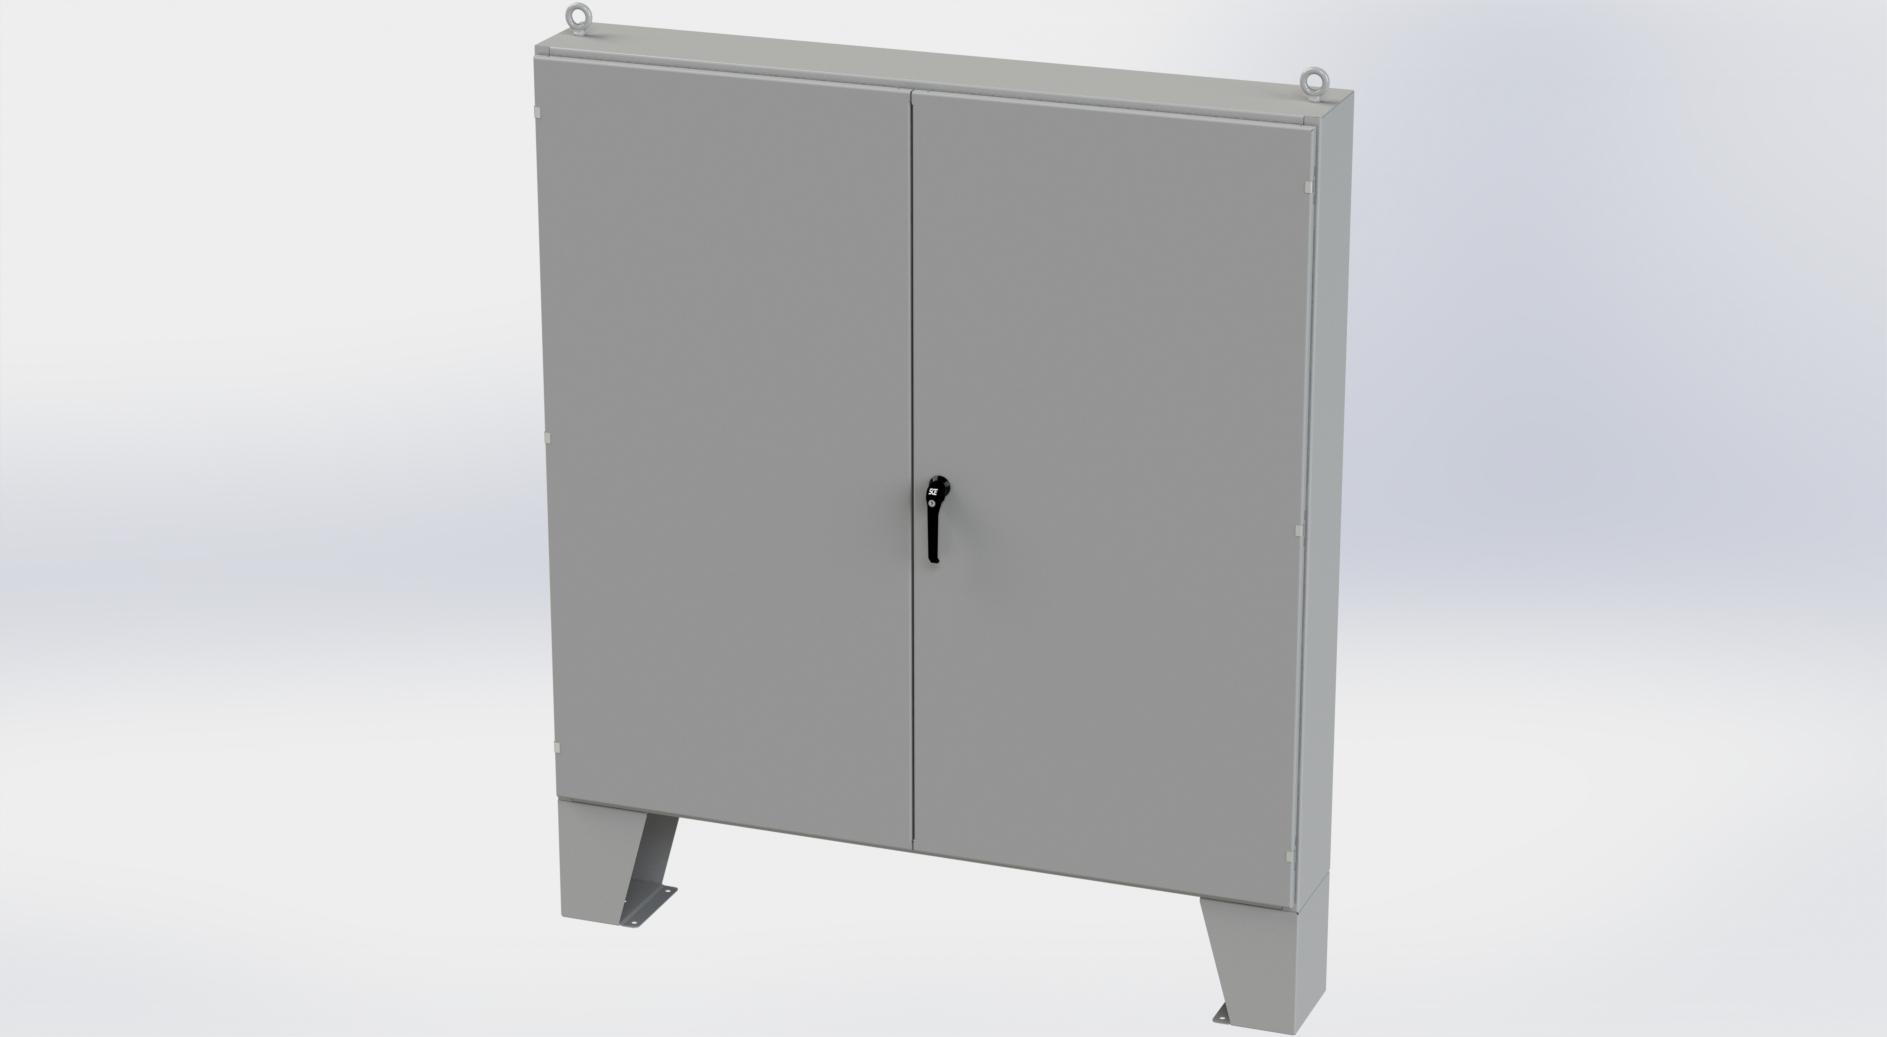 Saginaw Control SCE-727210ULP 2DR LP Enclosure, Height:72.00", Width:72.00", Depth:10.00", ANSI-61 gray powder coating inside and out. Optional sub-panels are powder coated white.